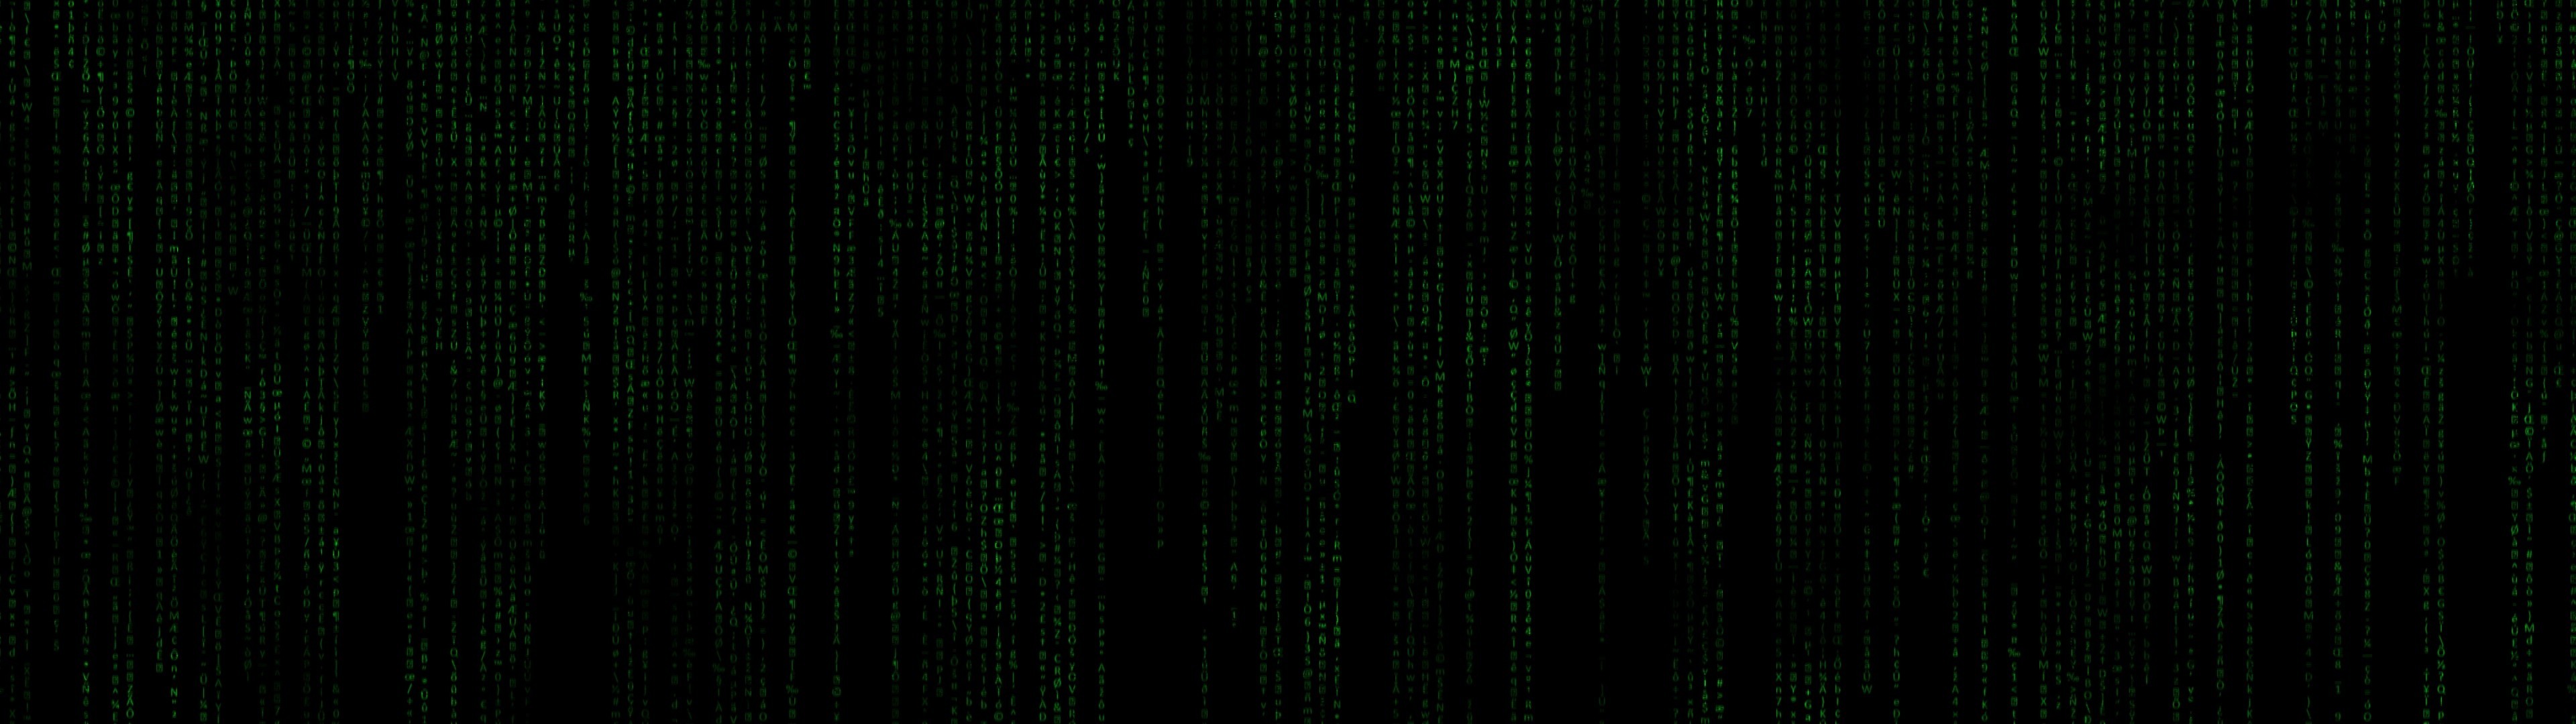 The Matrix Movies Texture Science Fiction Code Super Ultrawide 3840x1080